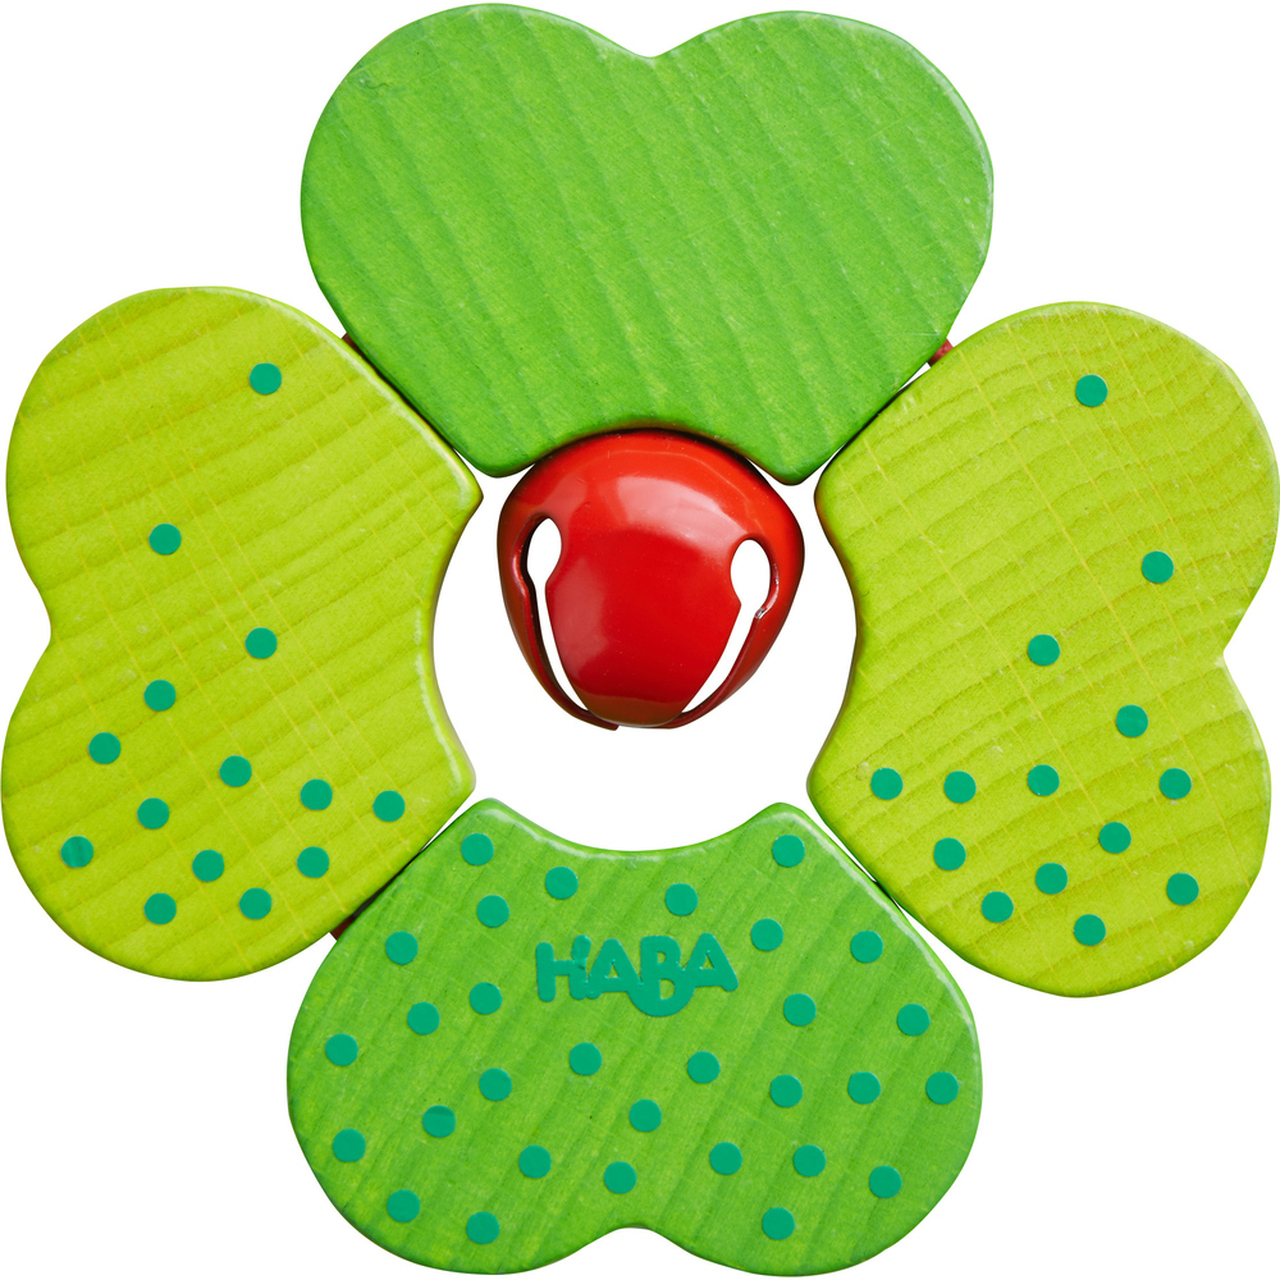 HABA Shamrock Wooden Baby Rattle with Bell